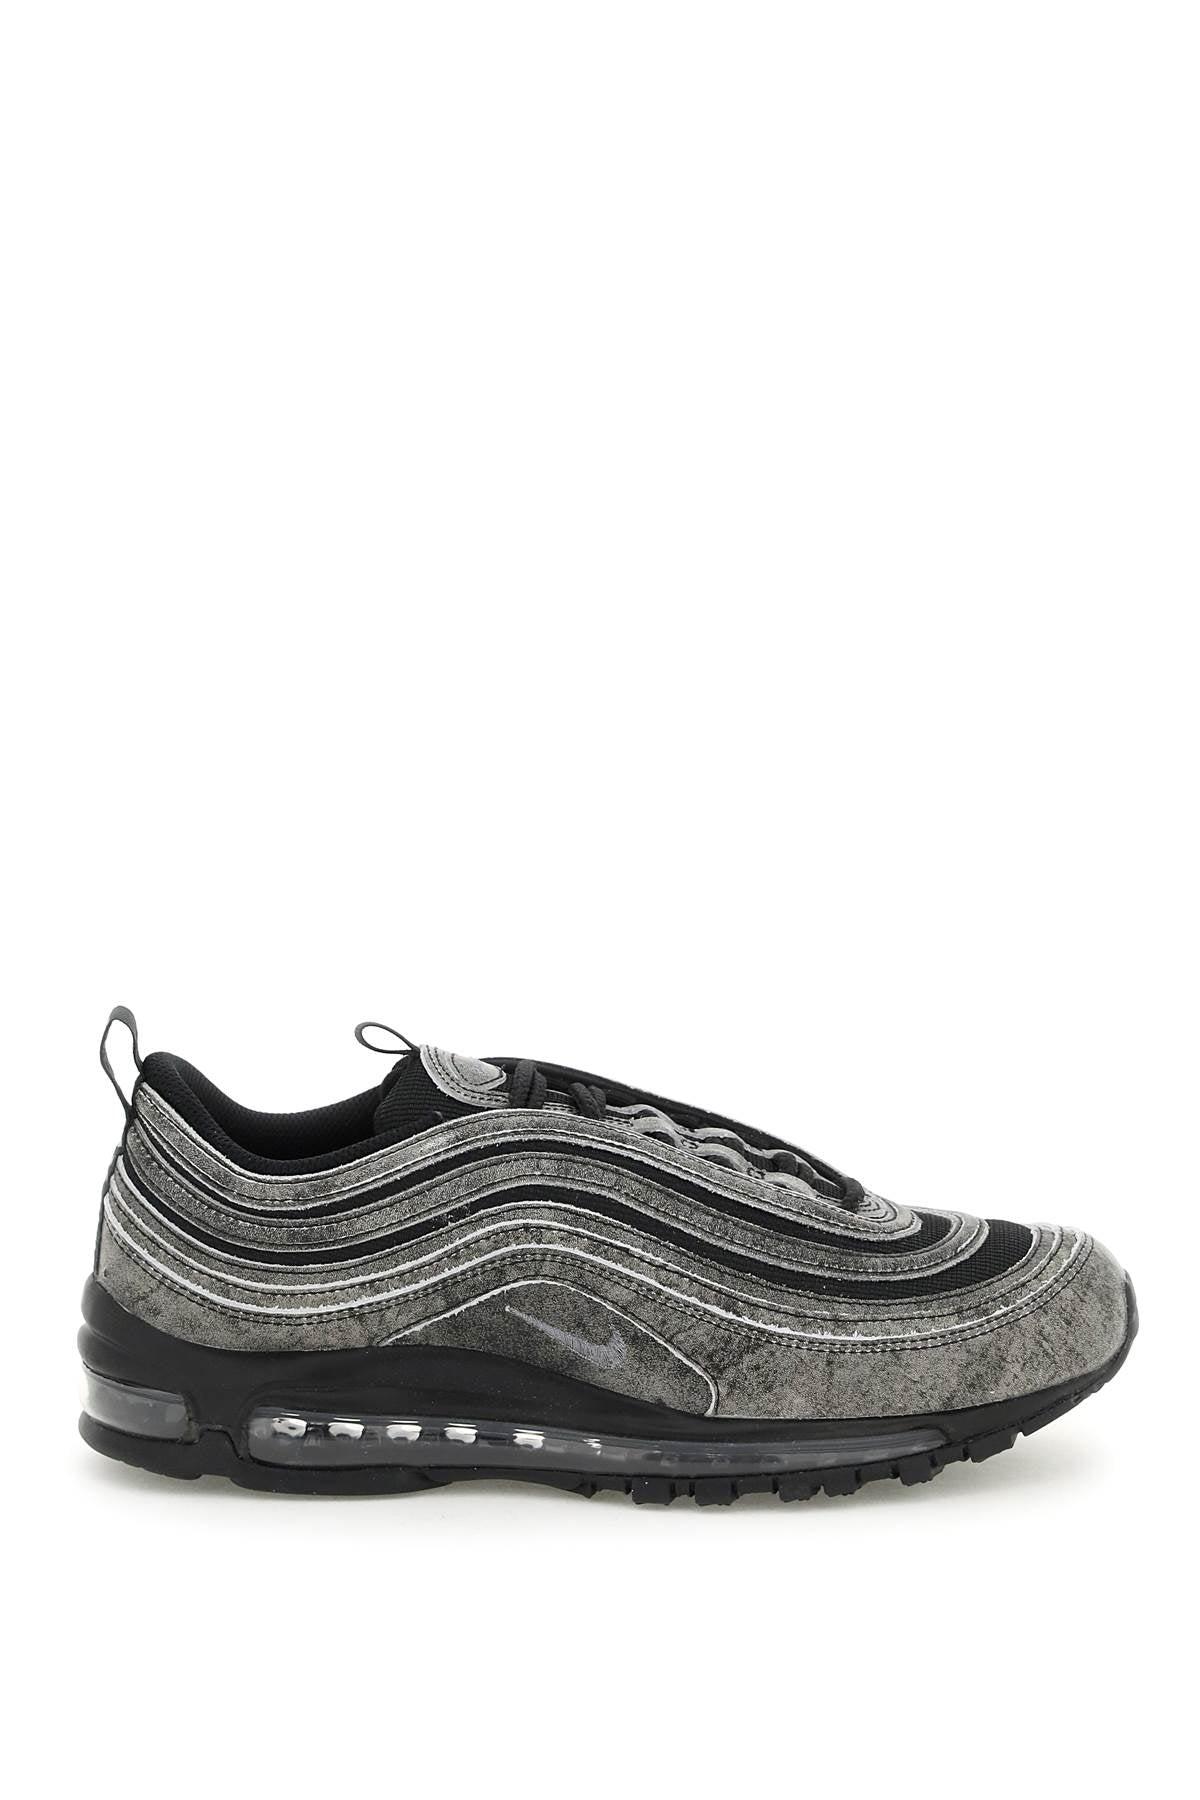 Comme des Garçons Nike Air Max 97 Sneakers in Gray for Men | Lyst